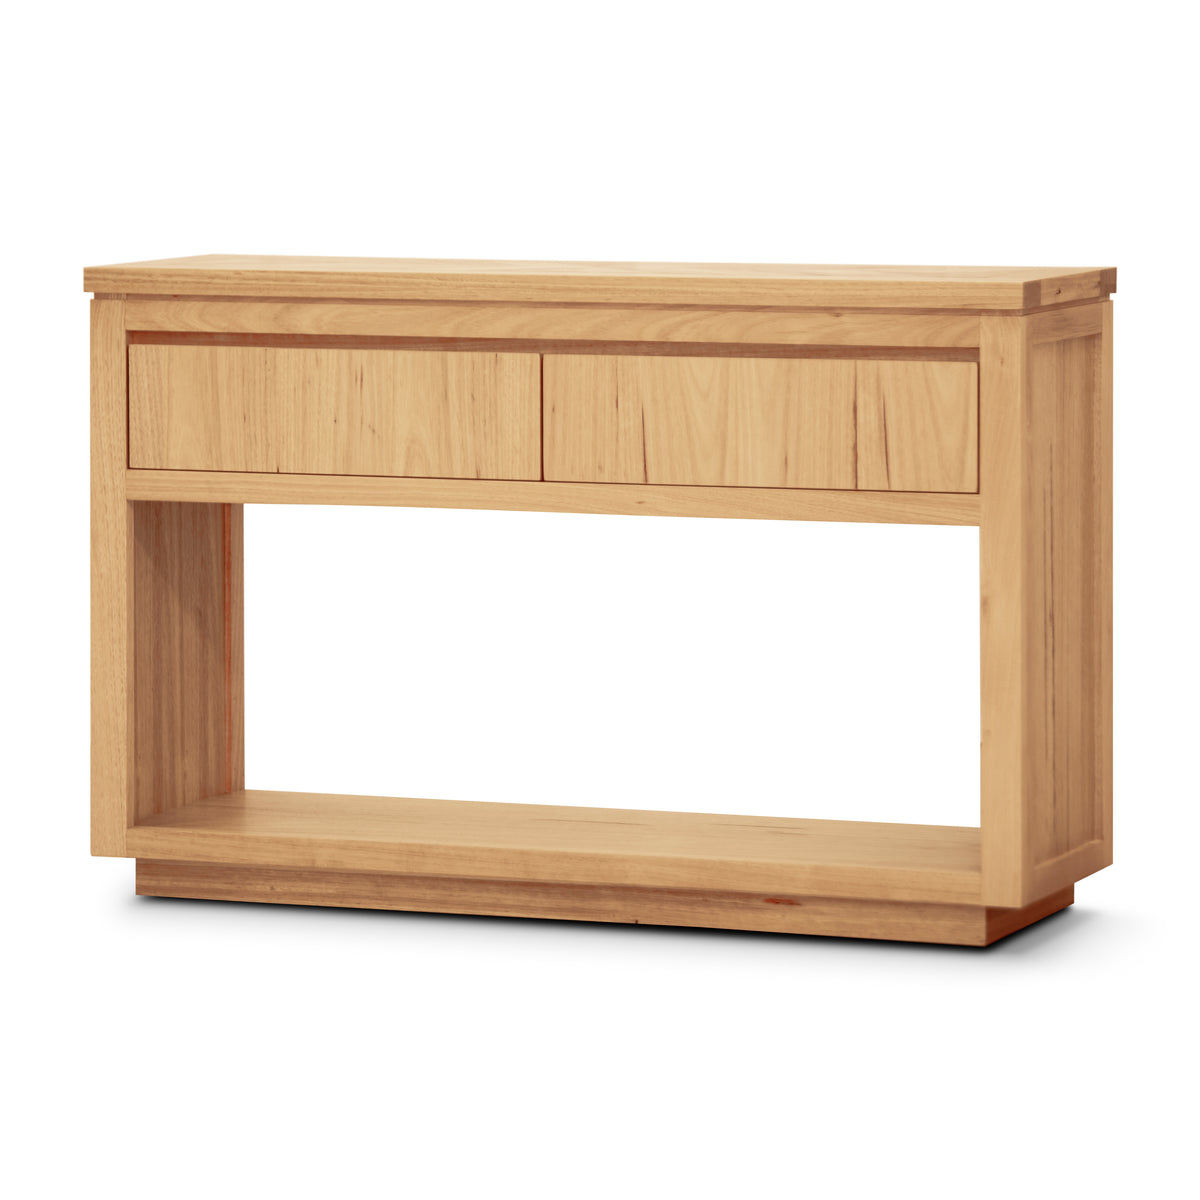 Rosemallow Console Table with Parquet Top Solid Messmate Timber - 119cm - Notbrand